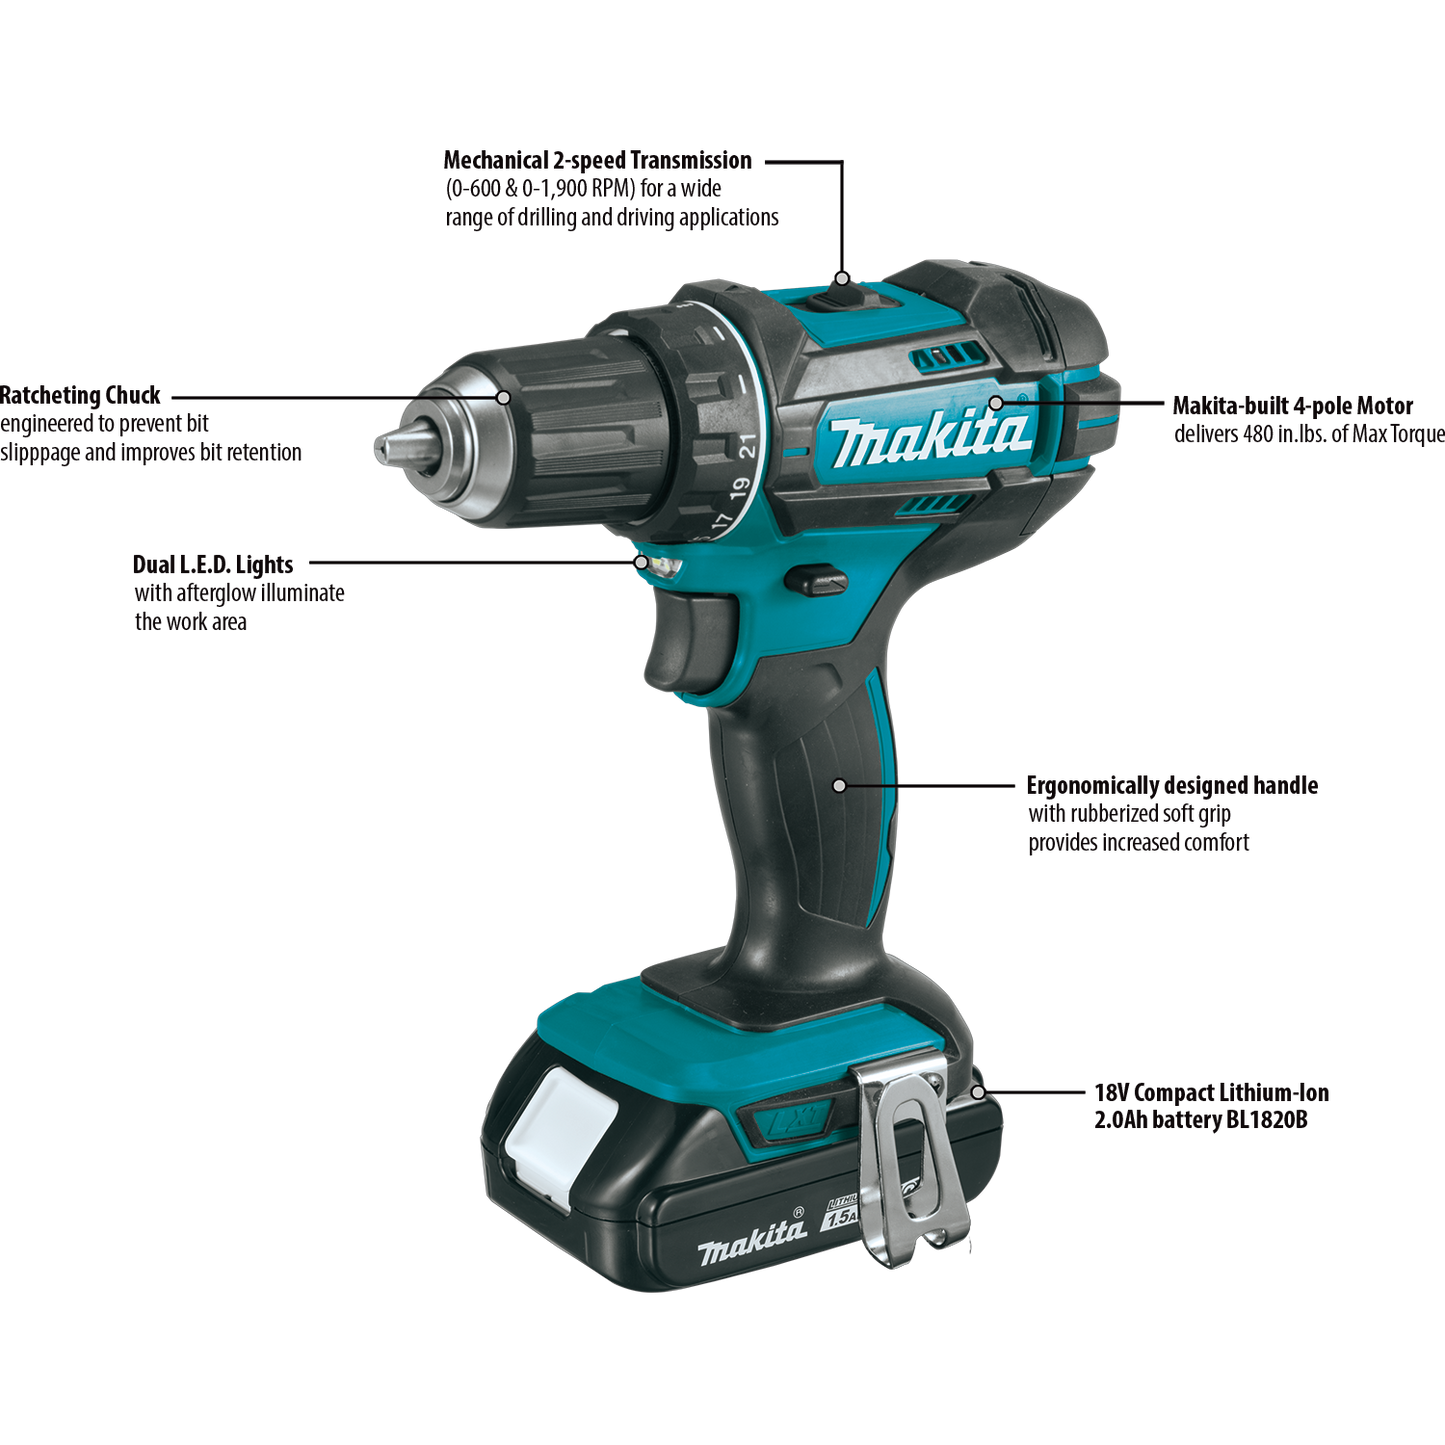 Makita 18 Volt LXT Lithium Ion Compact Cordless 2 Piece Combo Kit Factory Serviced OUT OF STOCK 8-25-23